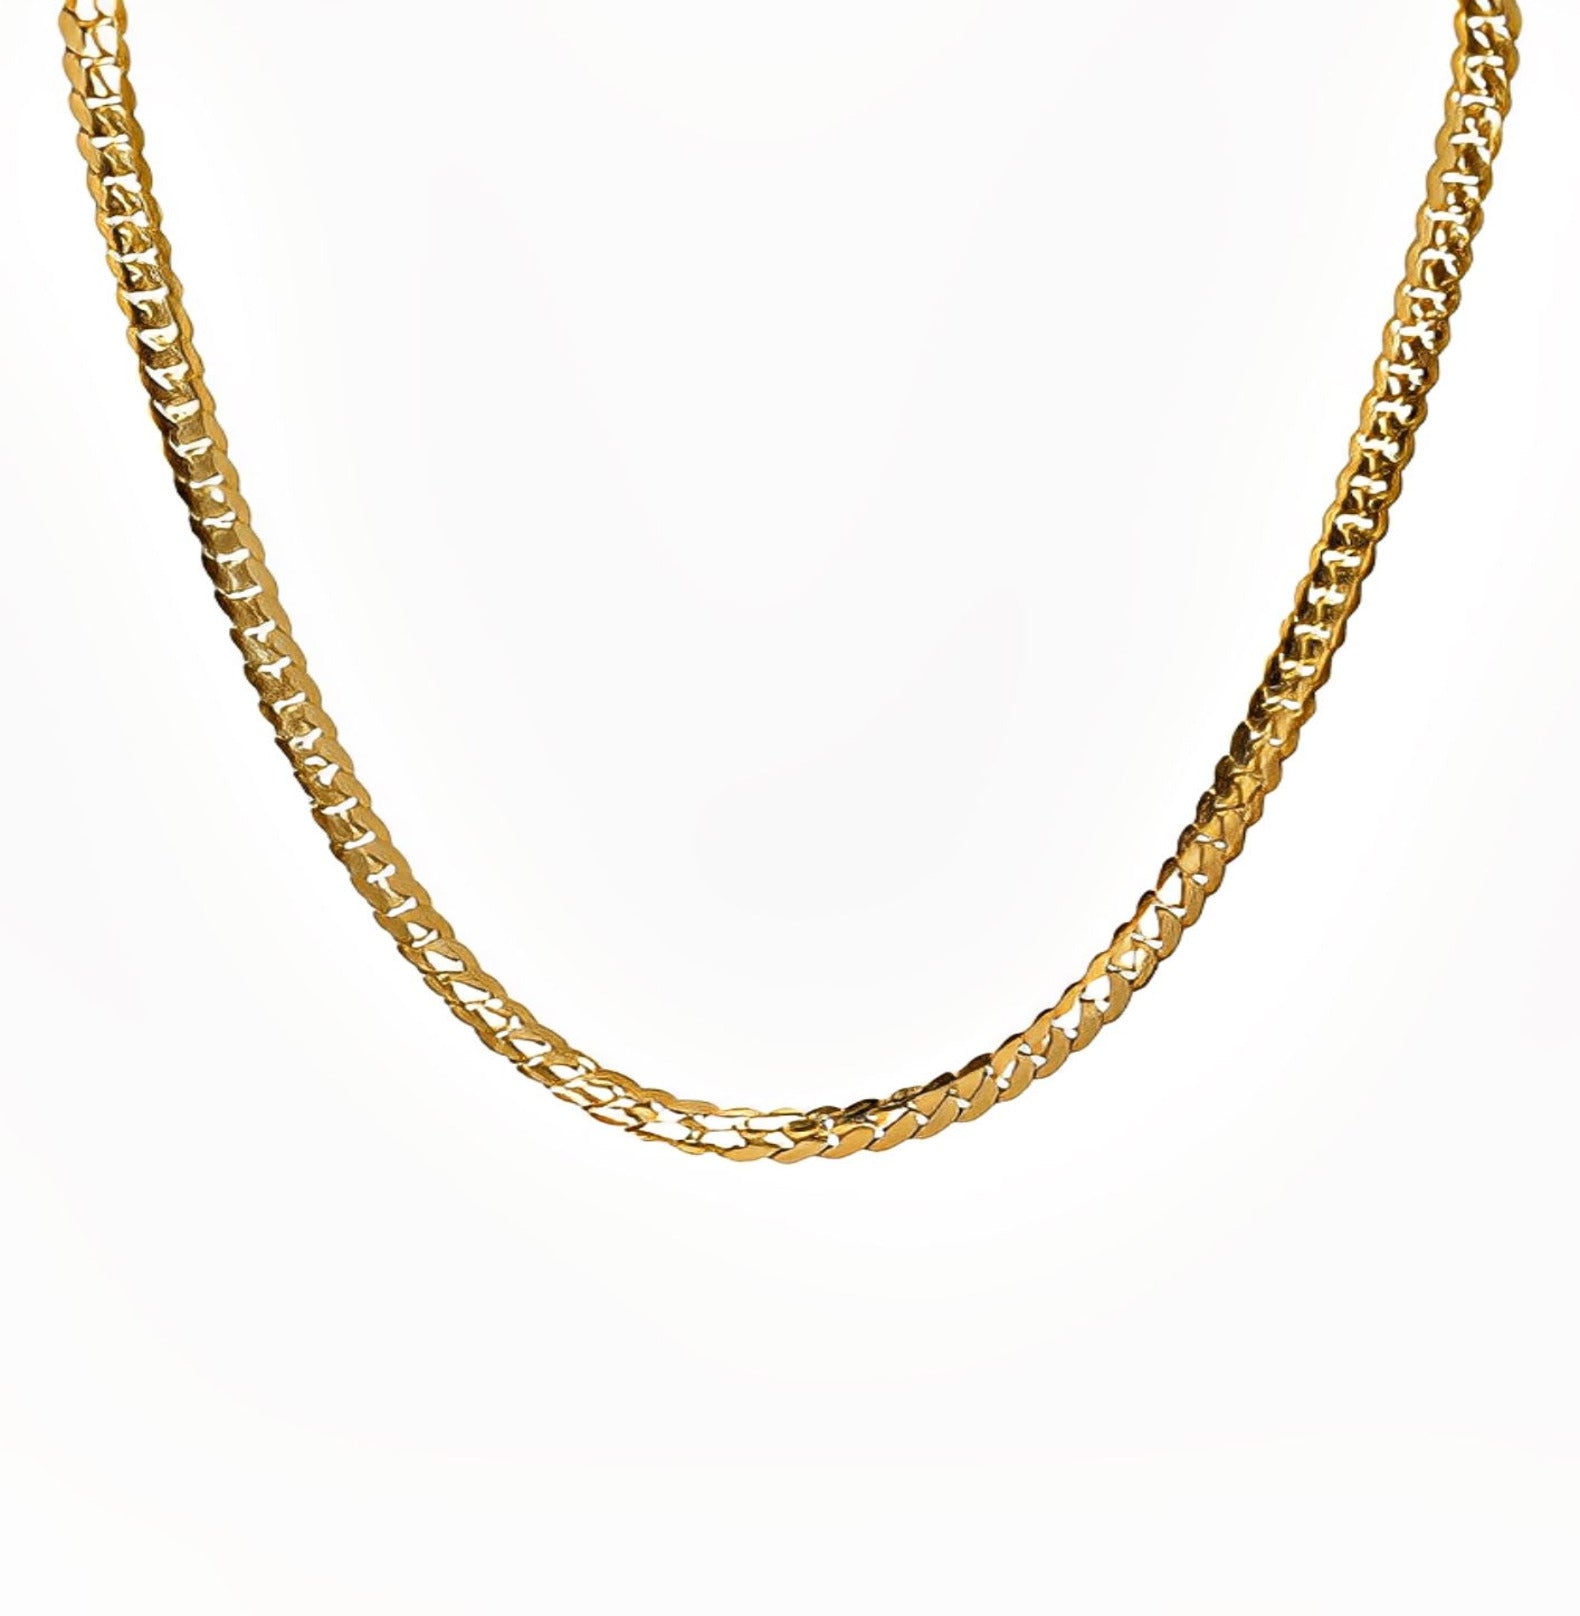 SIMPLE CHAIN NECKLACE neck Yubama Jewelry Online Store - The Elegant Designs of Gold and Silver ! 